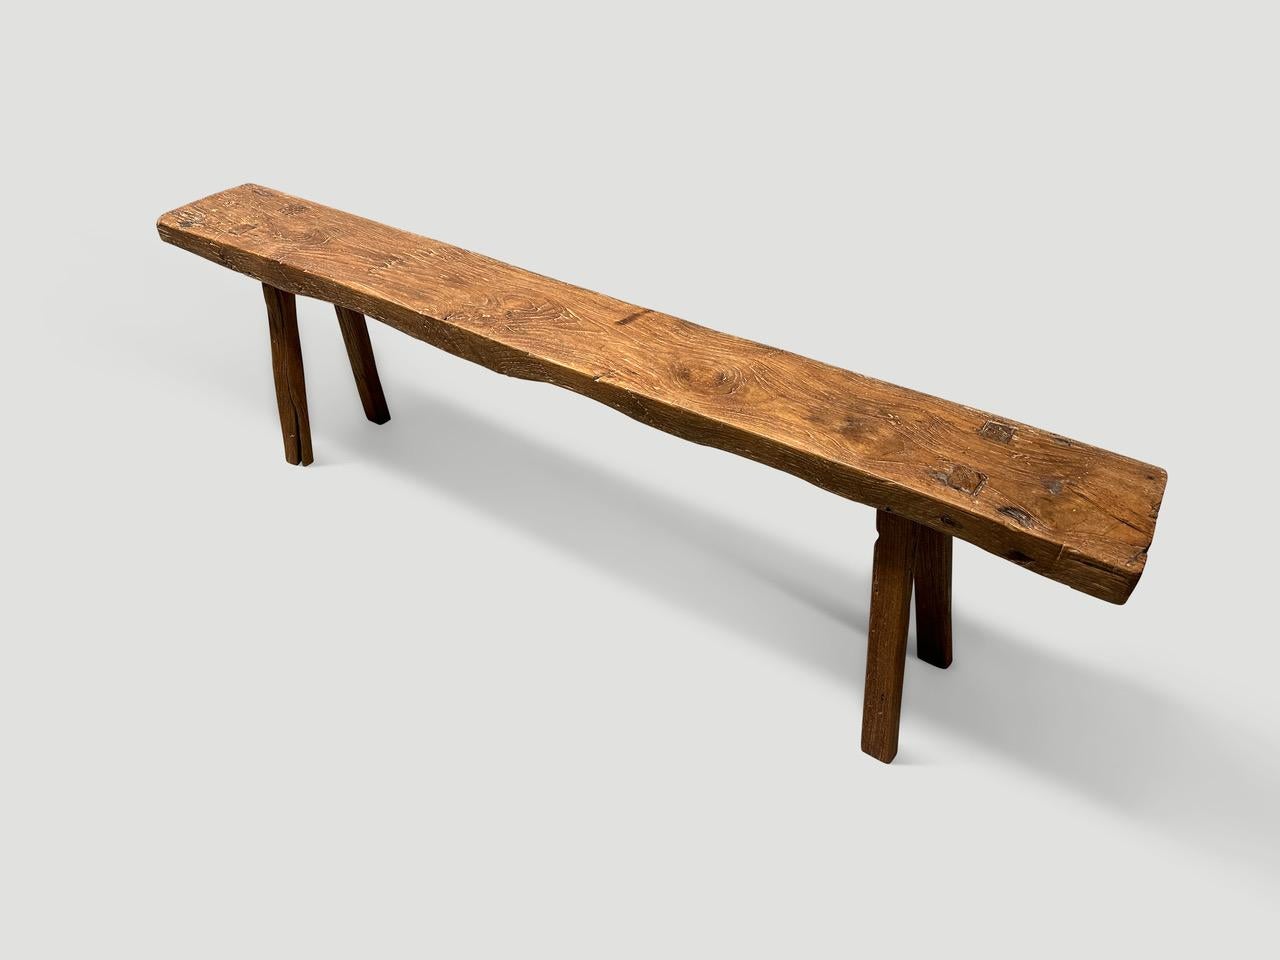 Impressive antique bench with beautiful character and patina. Hand made from a single two inch thick teak top. Circa 1950.

This bench was hand made in the spirit of Wabi-Sabi, a Japanese philosophy that beauty can be found in imperfection and